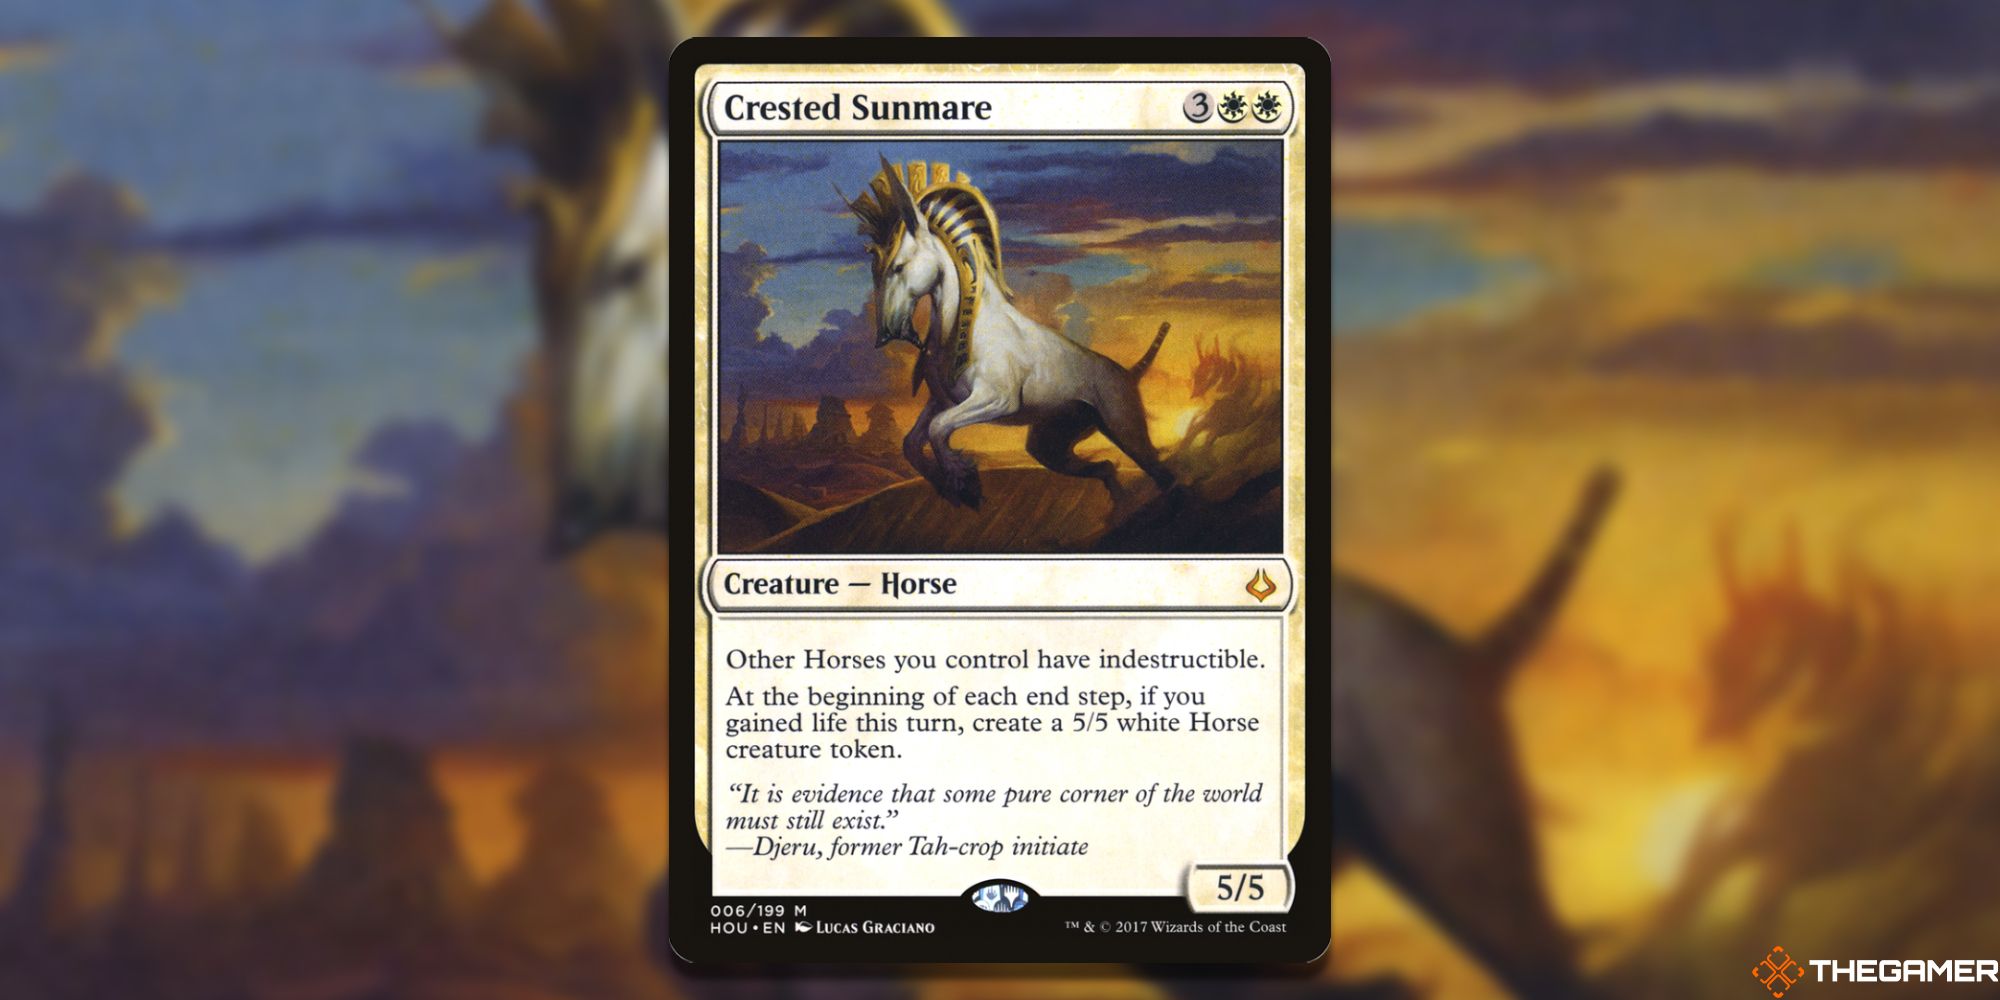 An image of the Crested Sunmare card in Magic: The Gathering, with artwork by Lucas Gracian